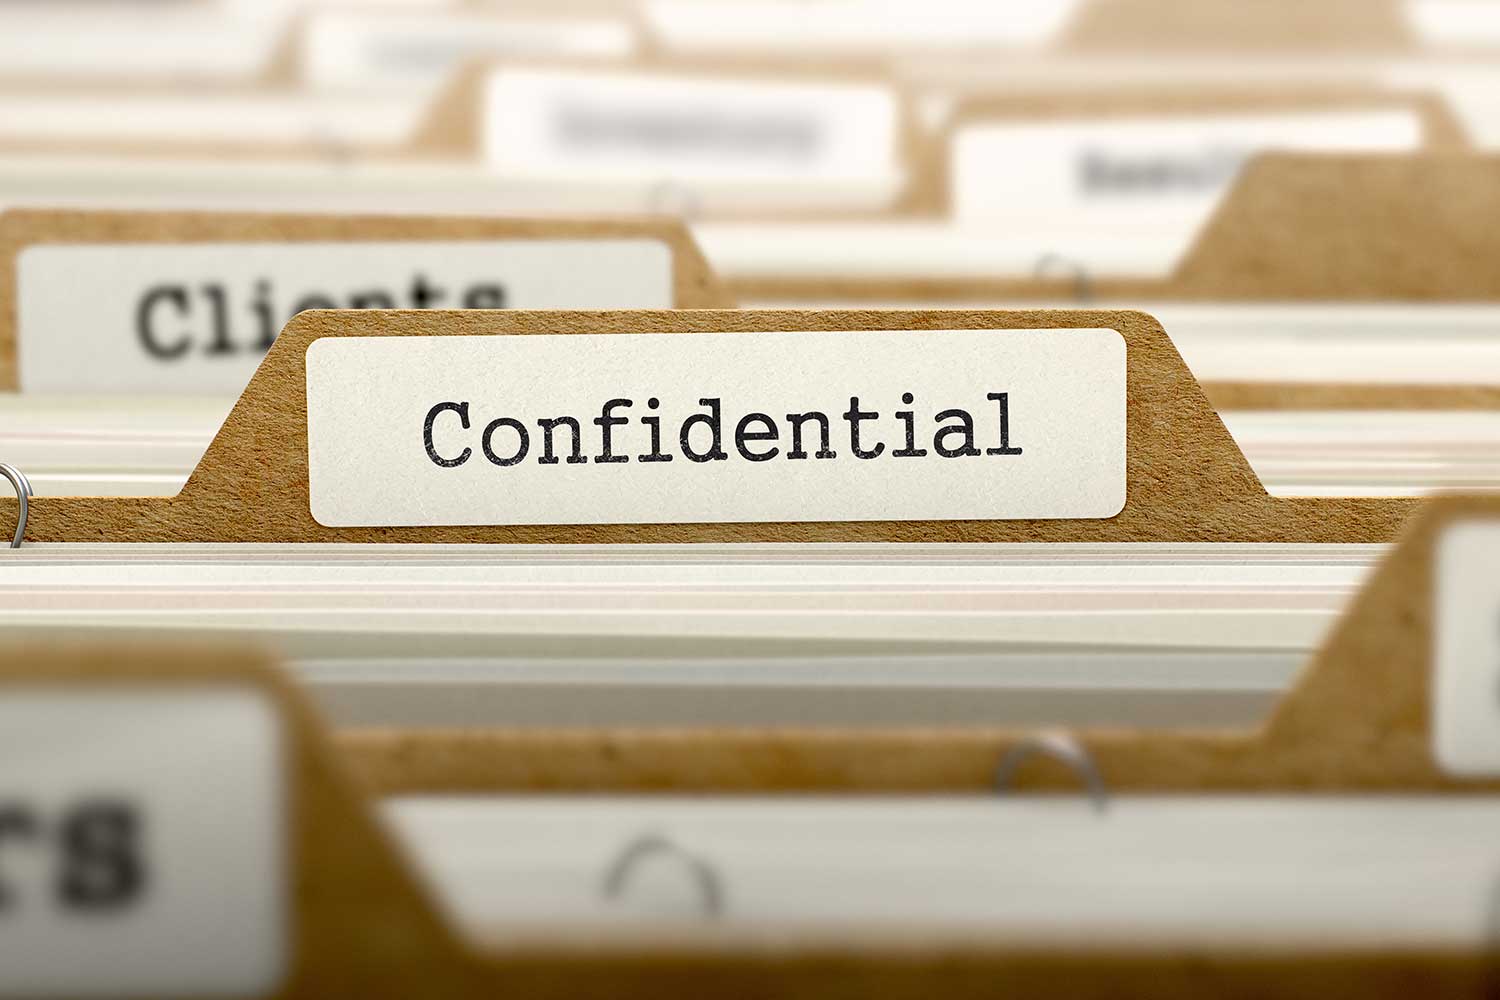 The word "confidential" on a folder.